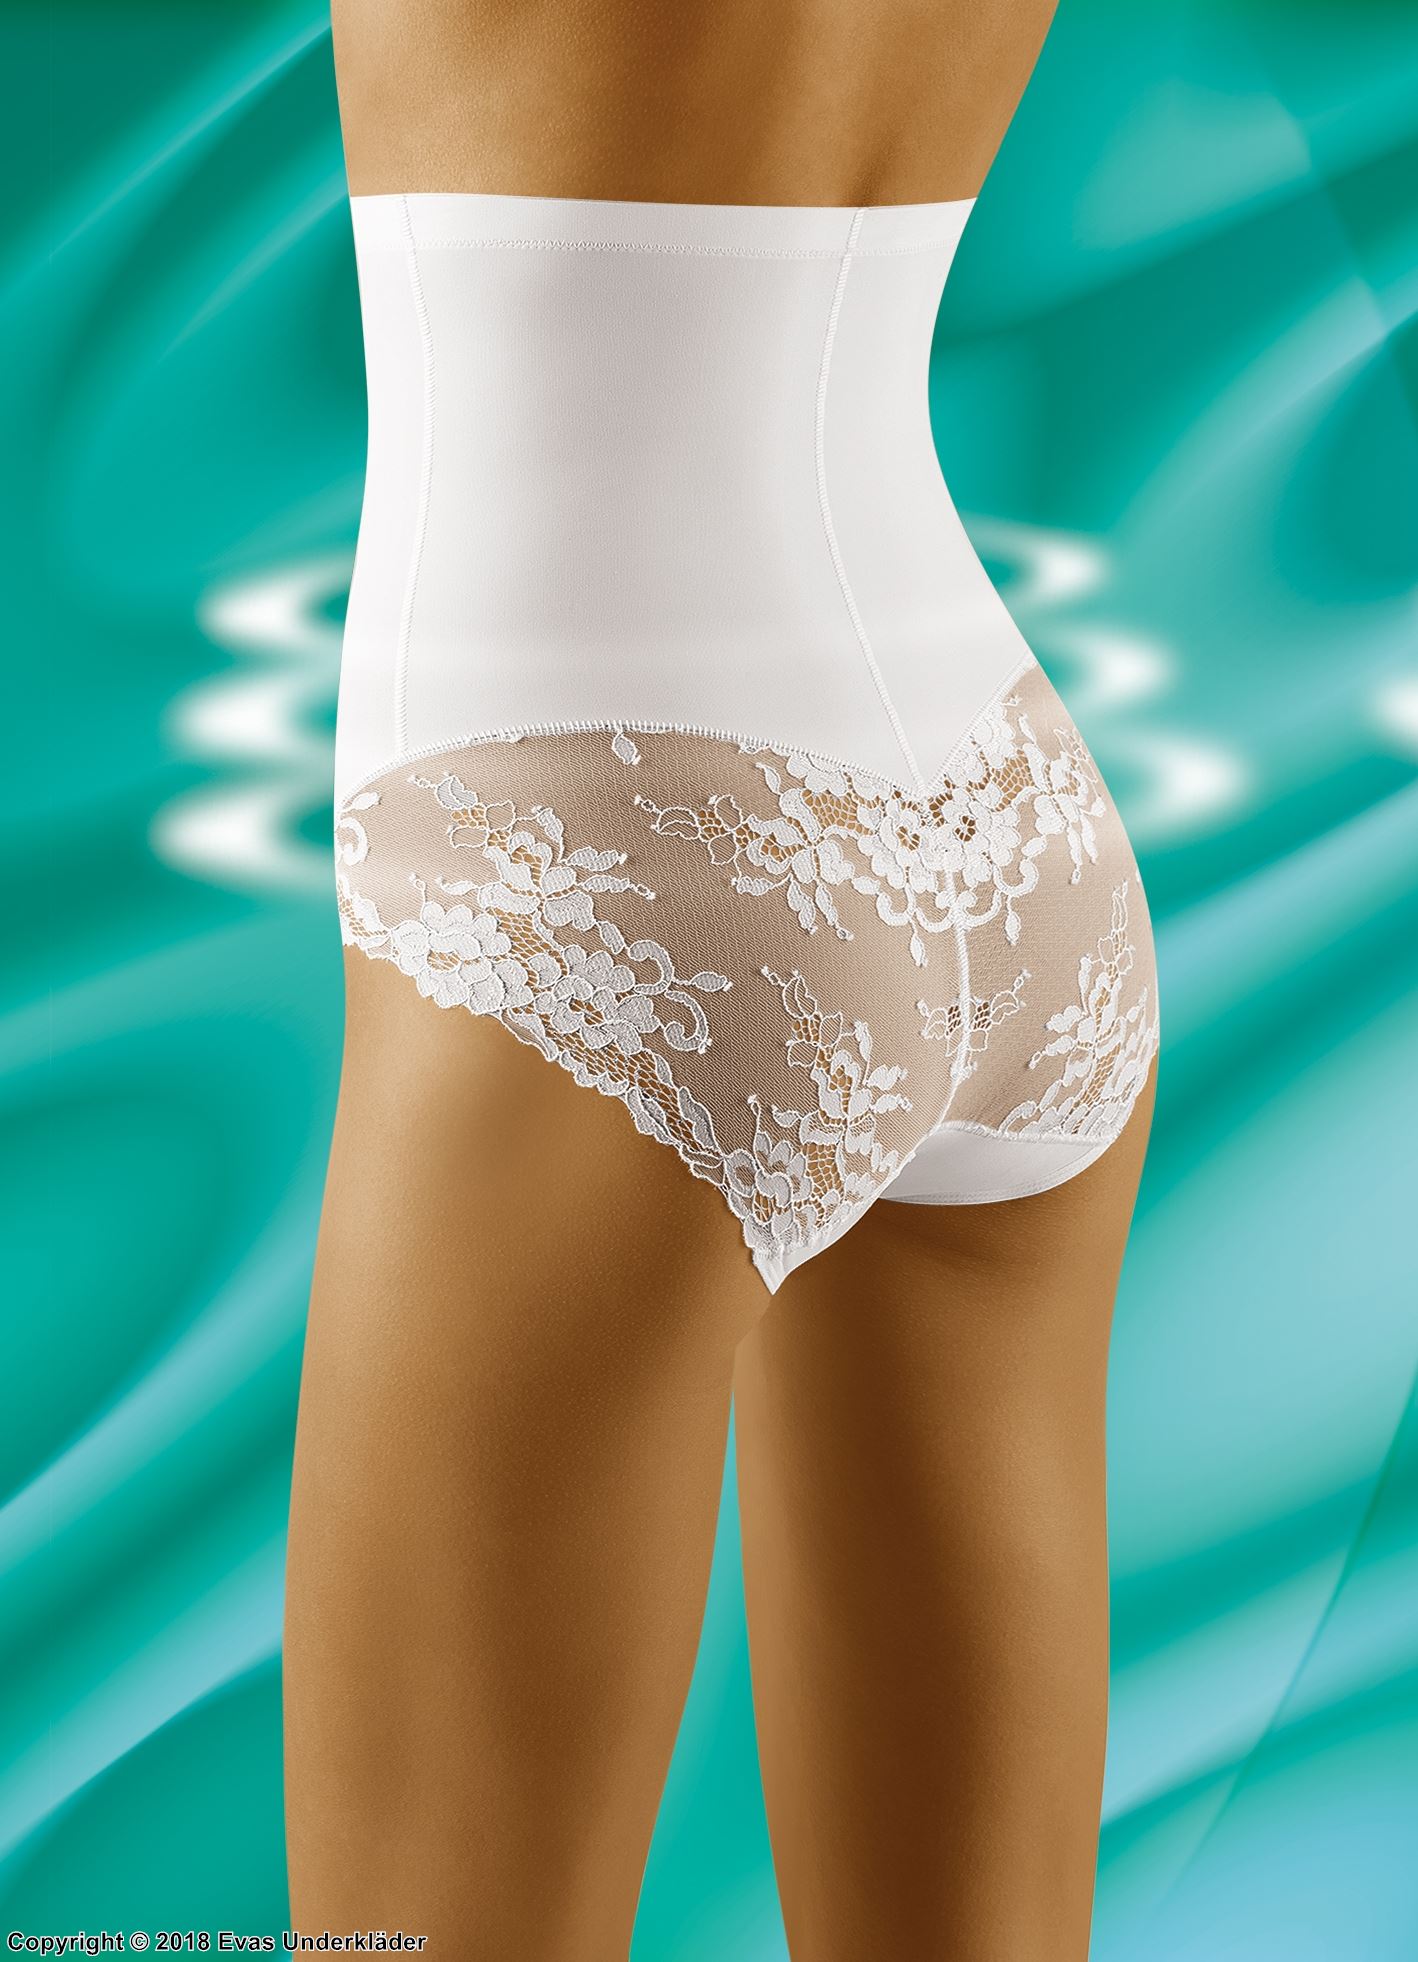 Shaping briefs, lace panel, very high waist